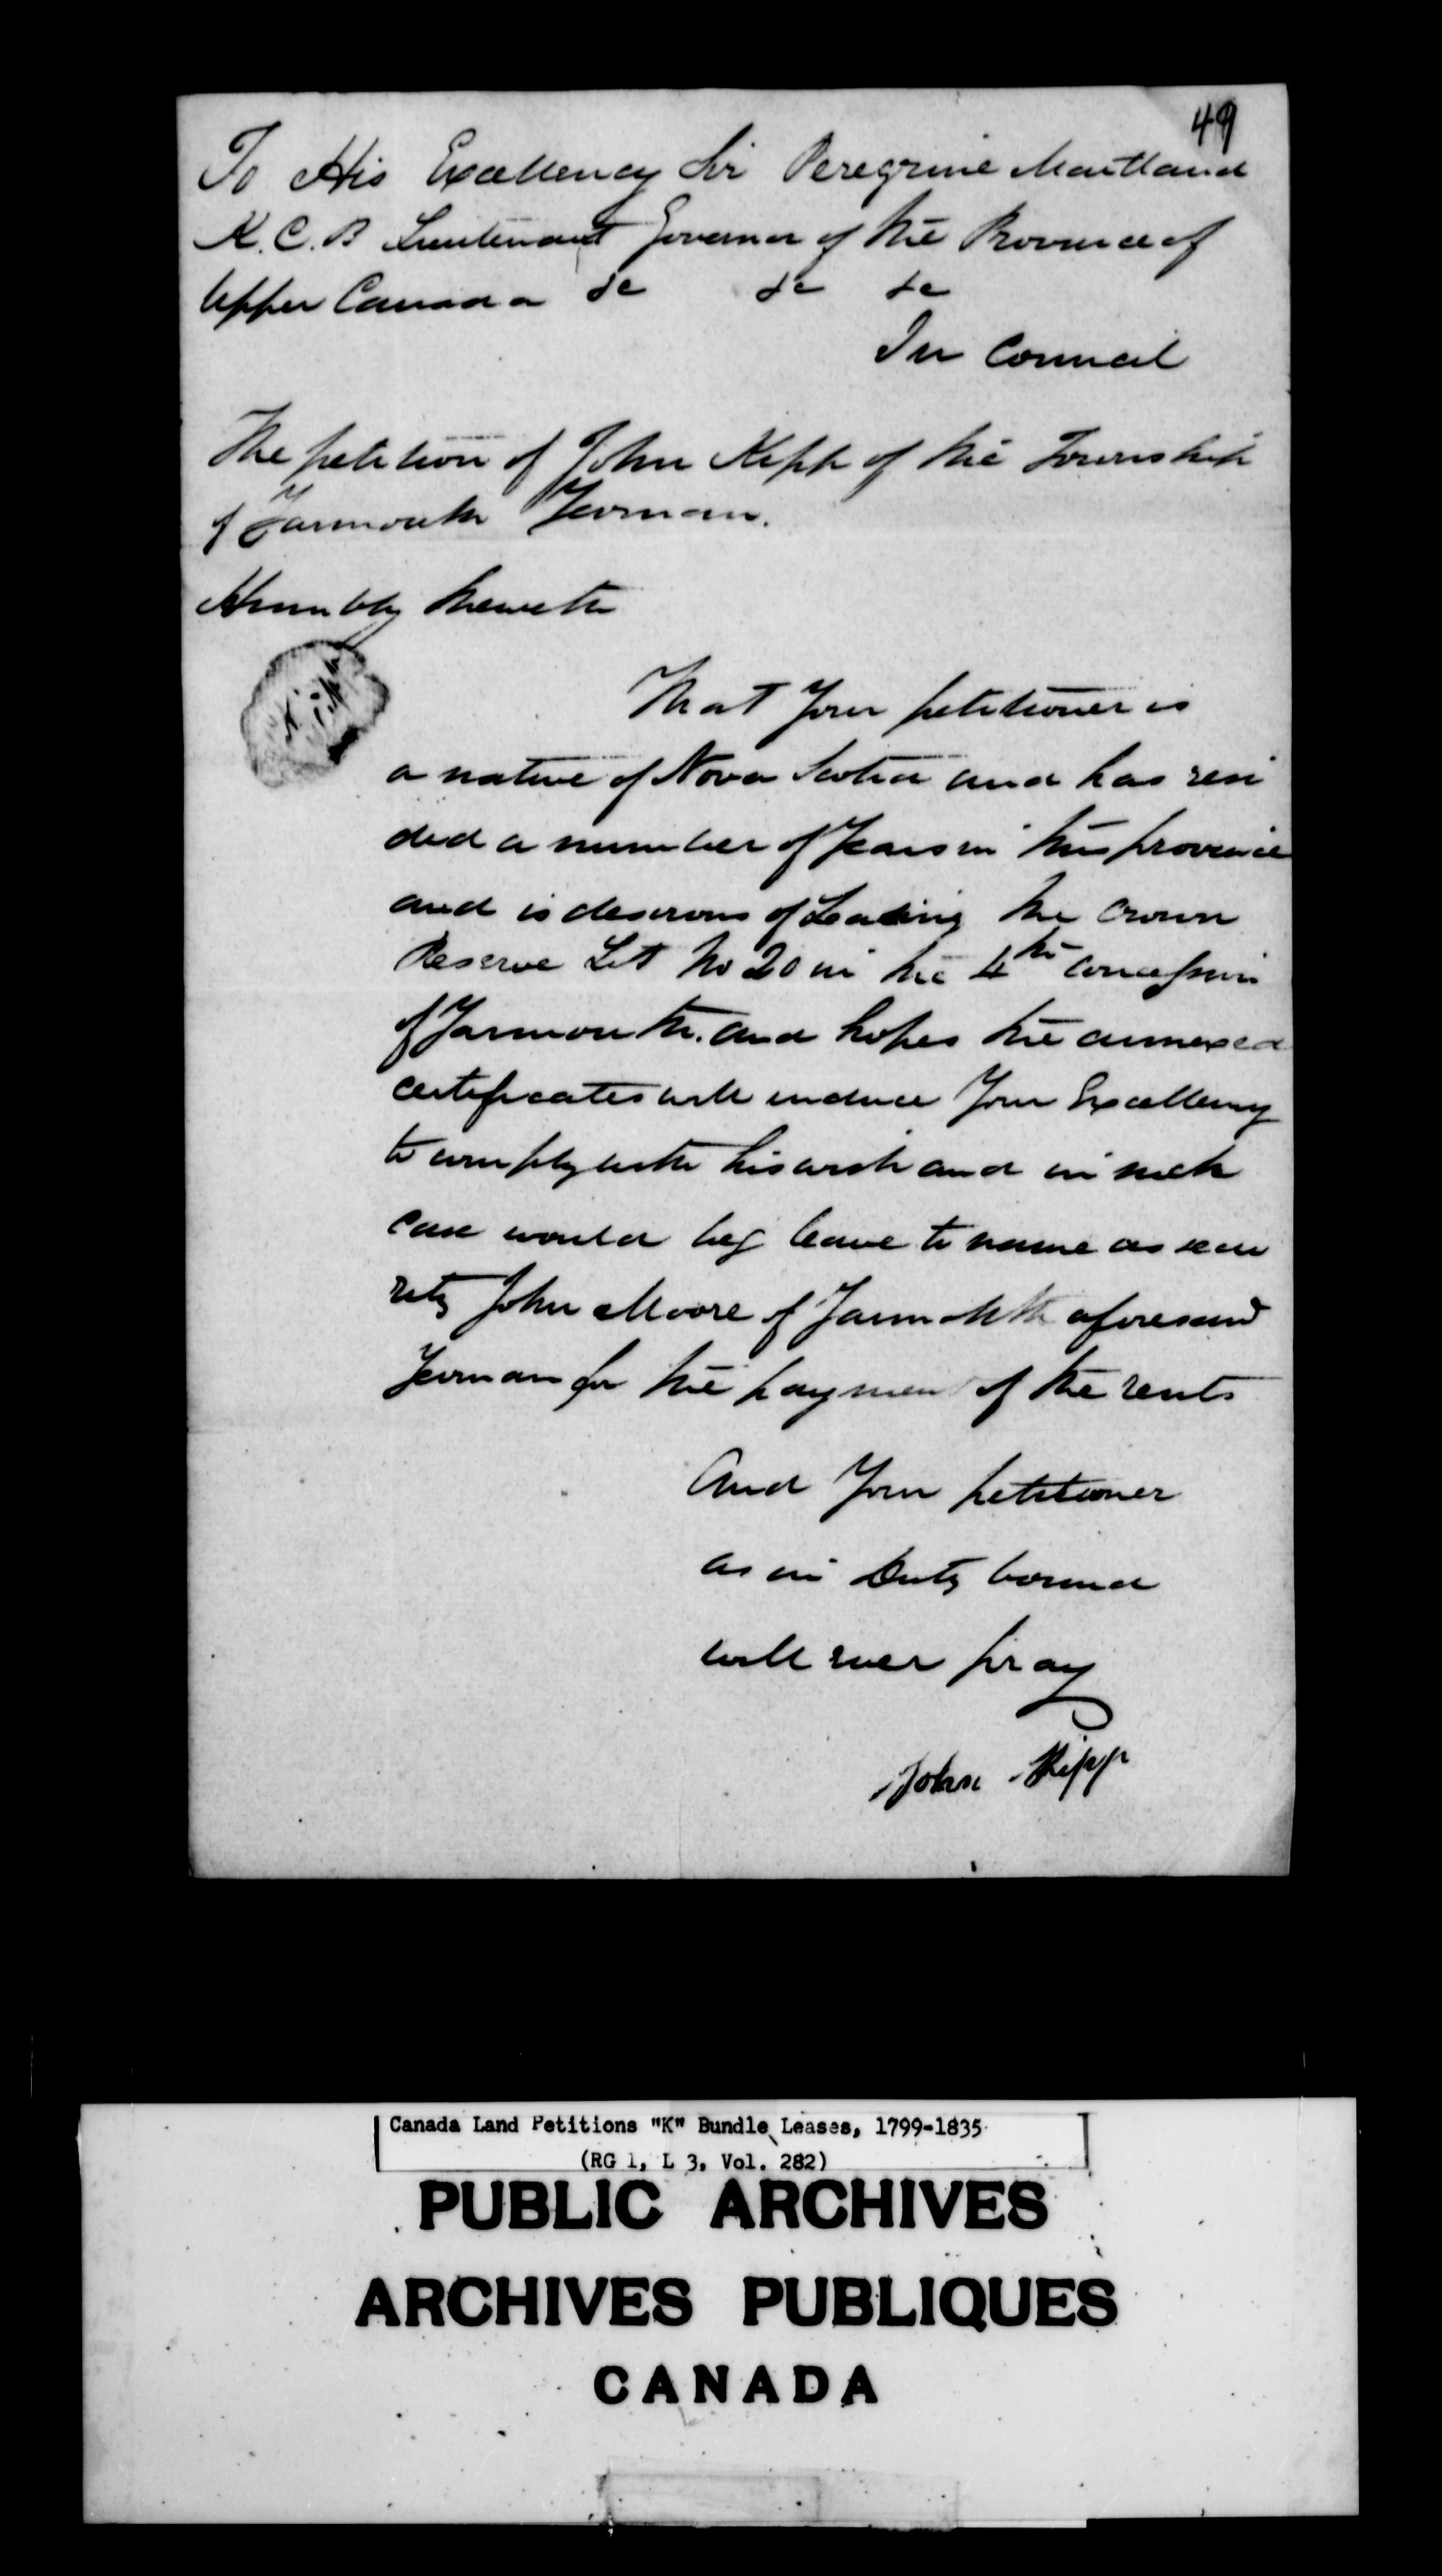 Title: Upper Canada Land Petitions (1763-1865) - Mikan Number: 205131 - Microform: c-2124